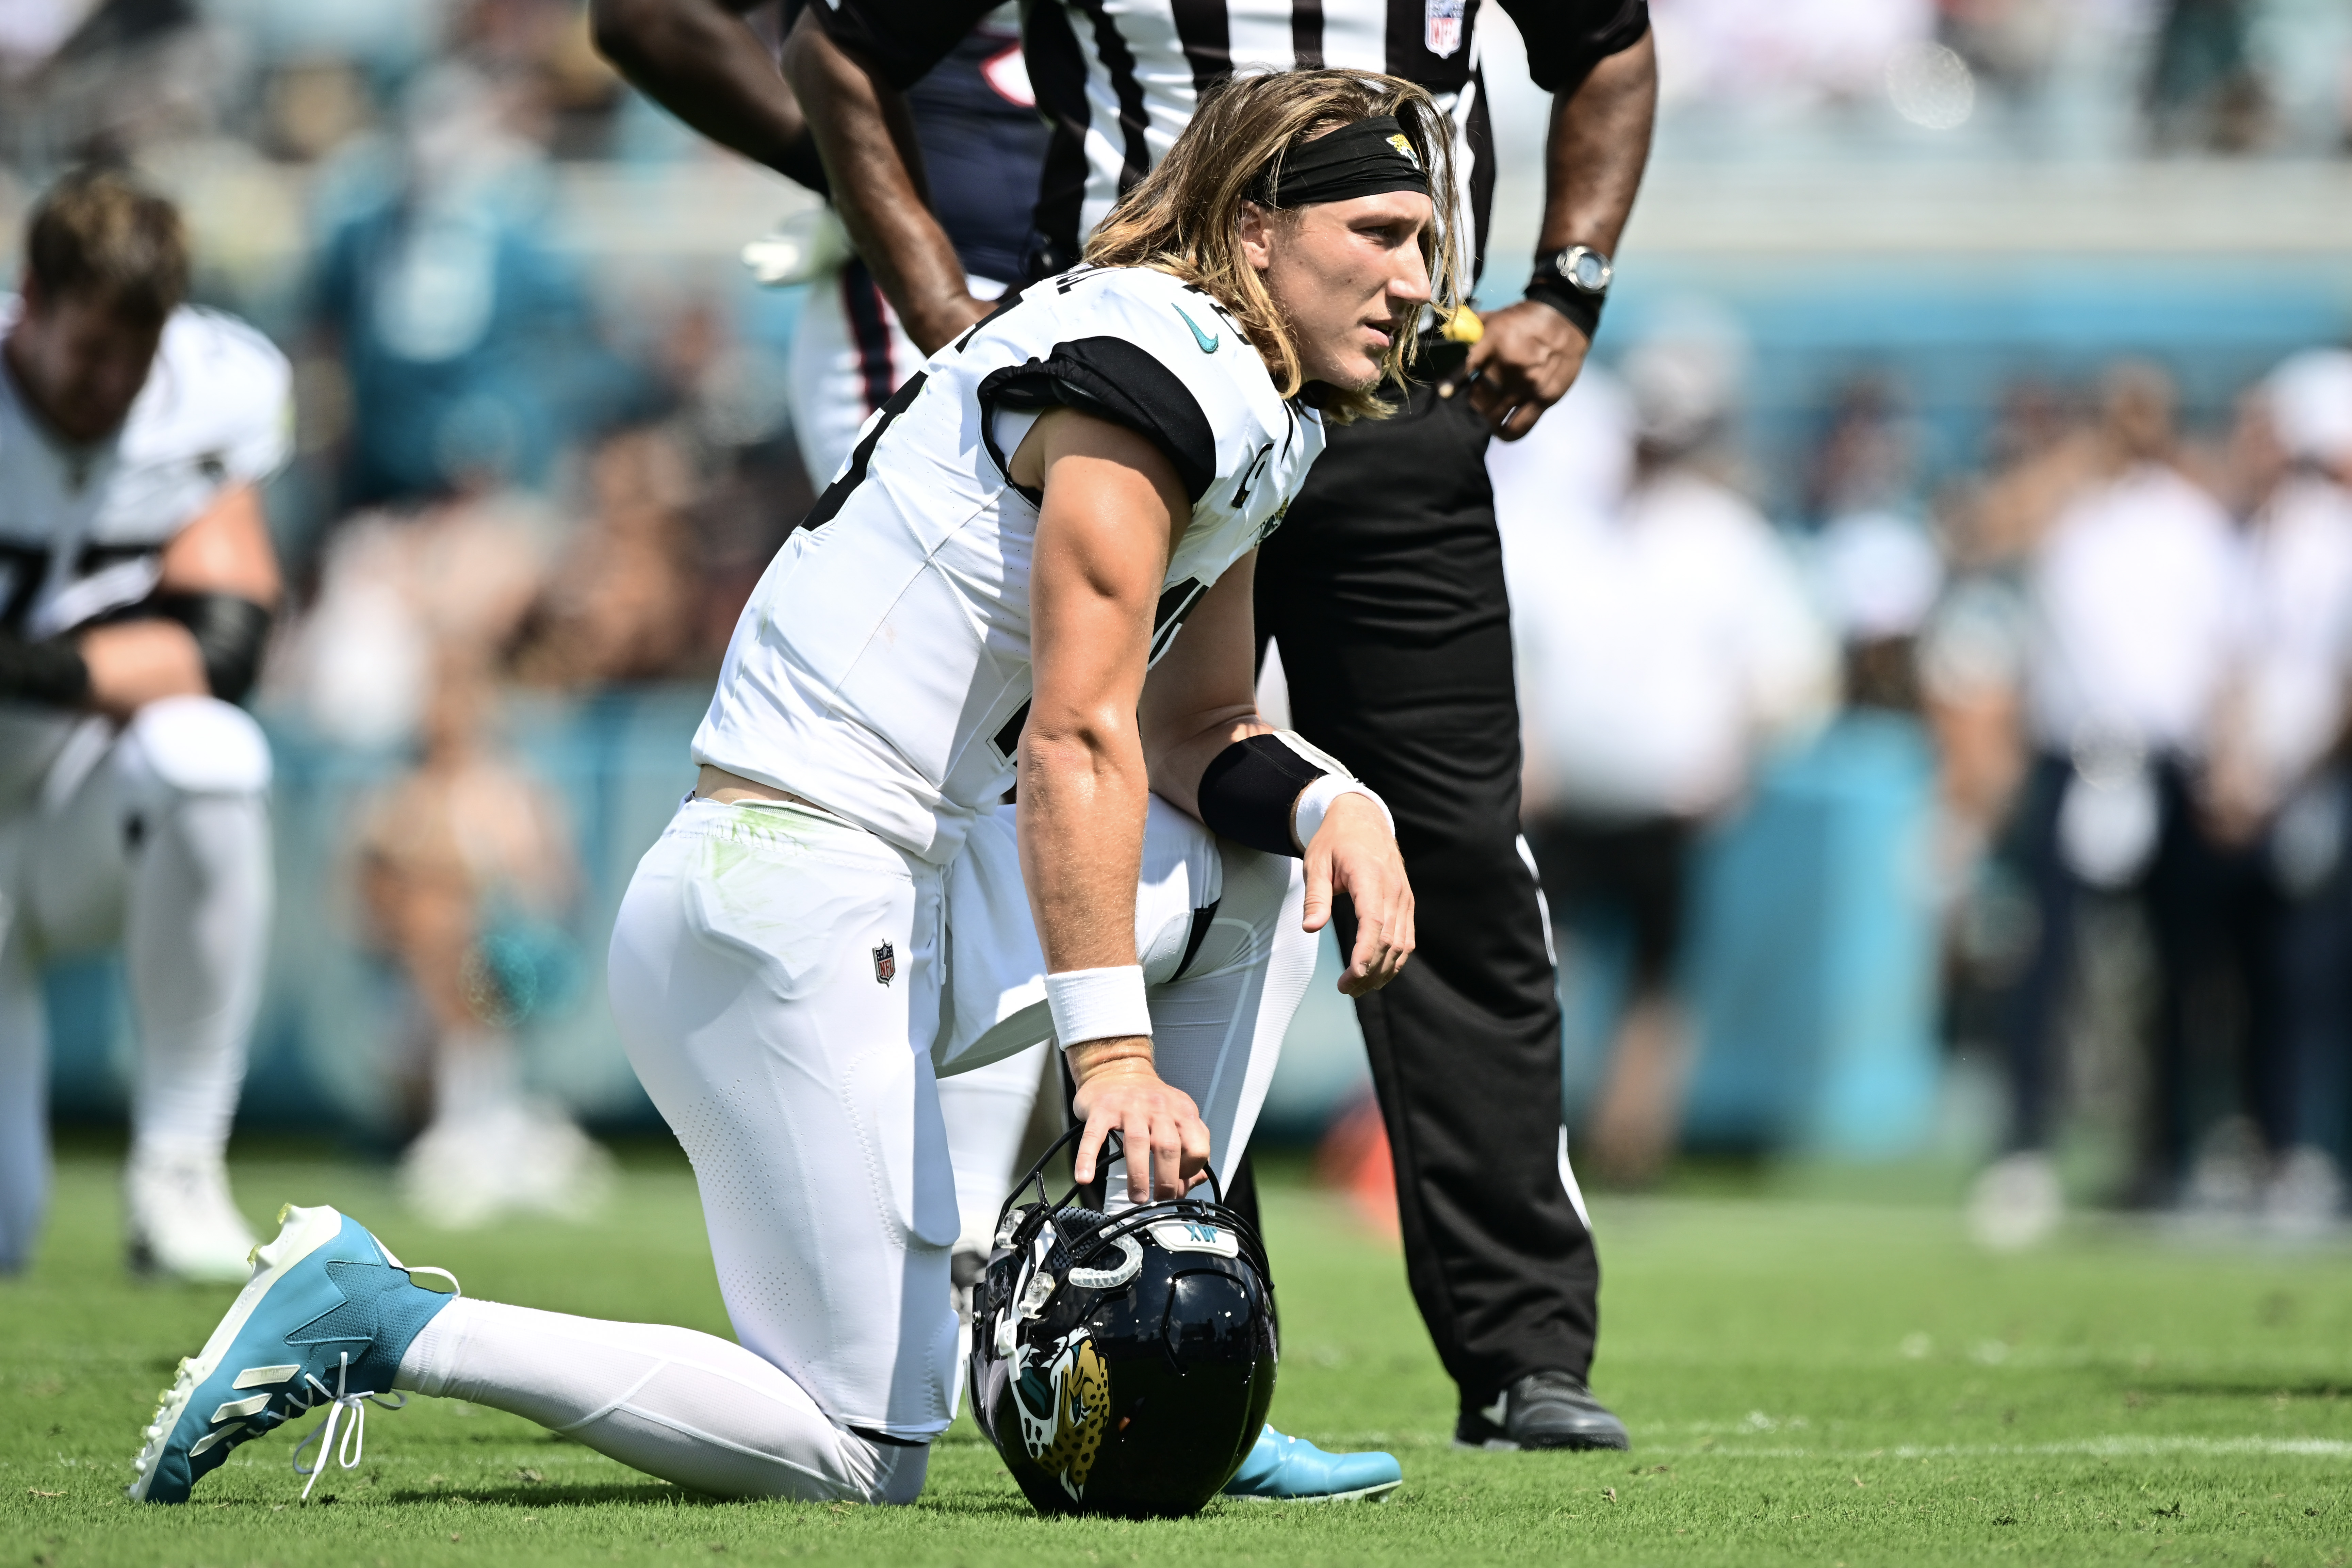 We don't look really good right now': Jaguars frustrated after letdown  against Texans